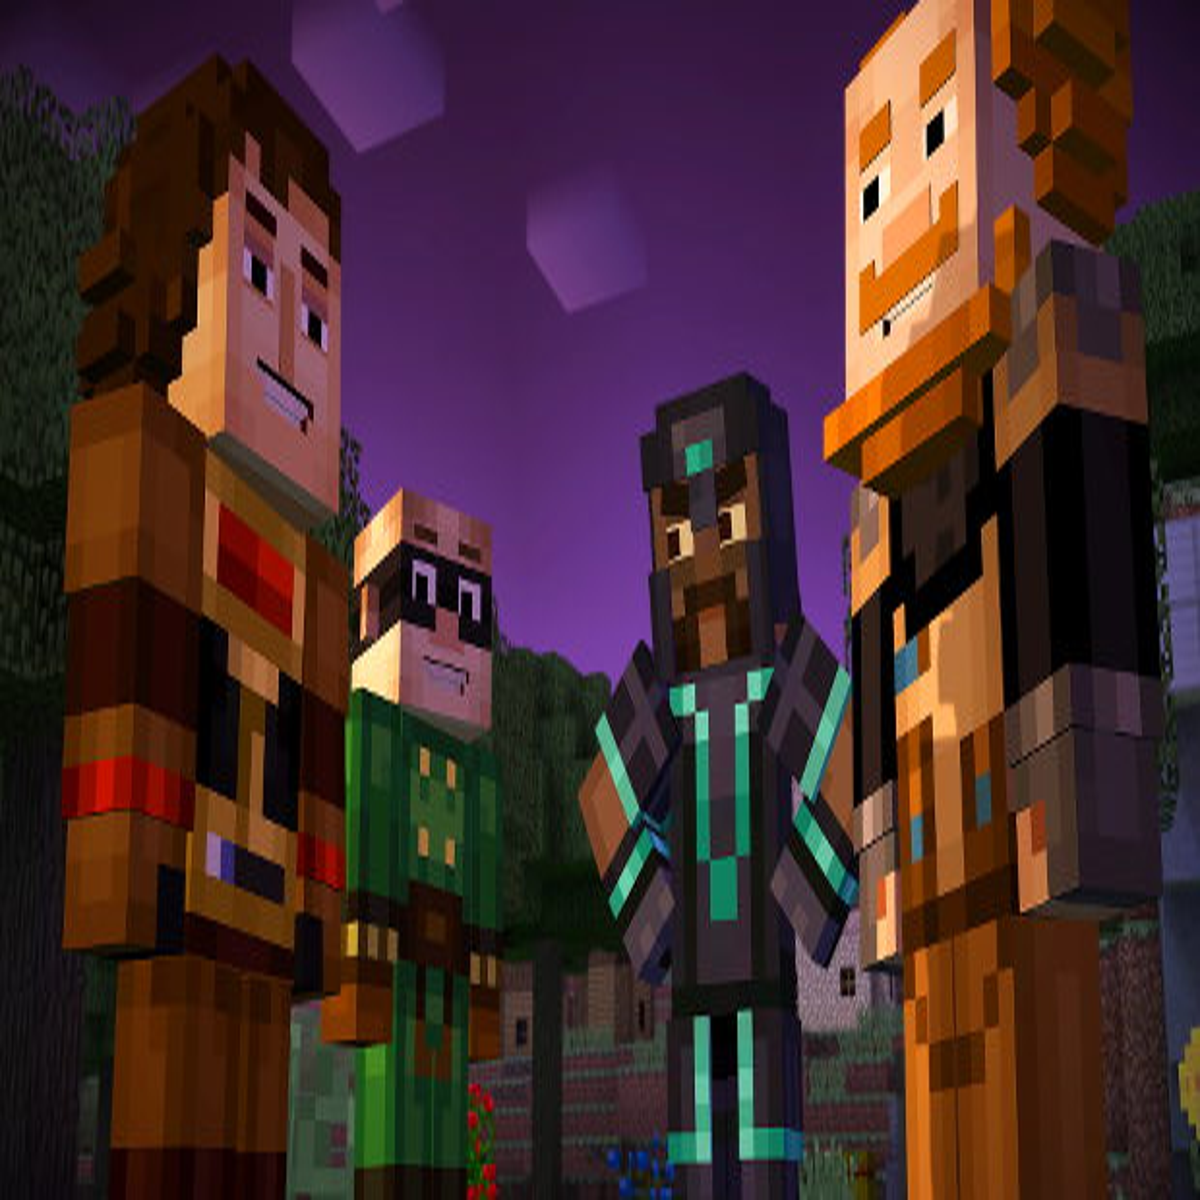 Minecraft: Story Mode - A Telltale Games Series News and Videos